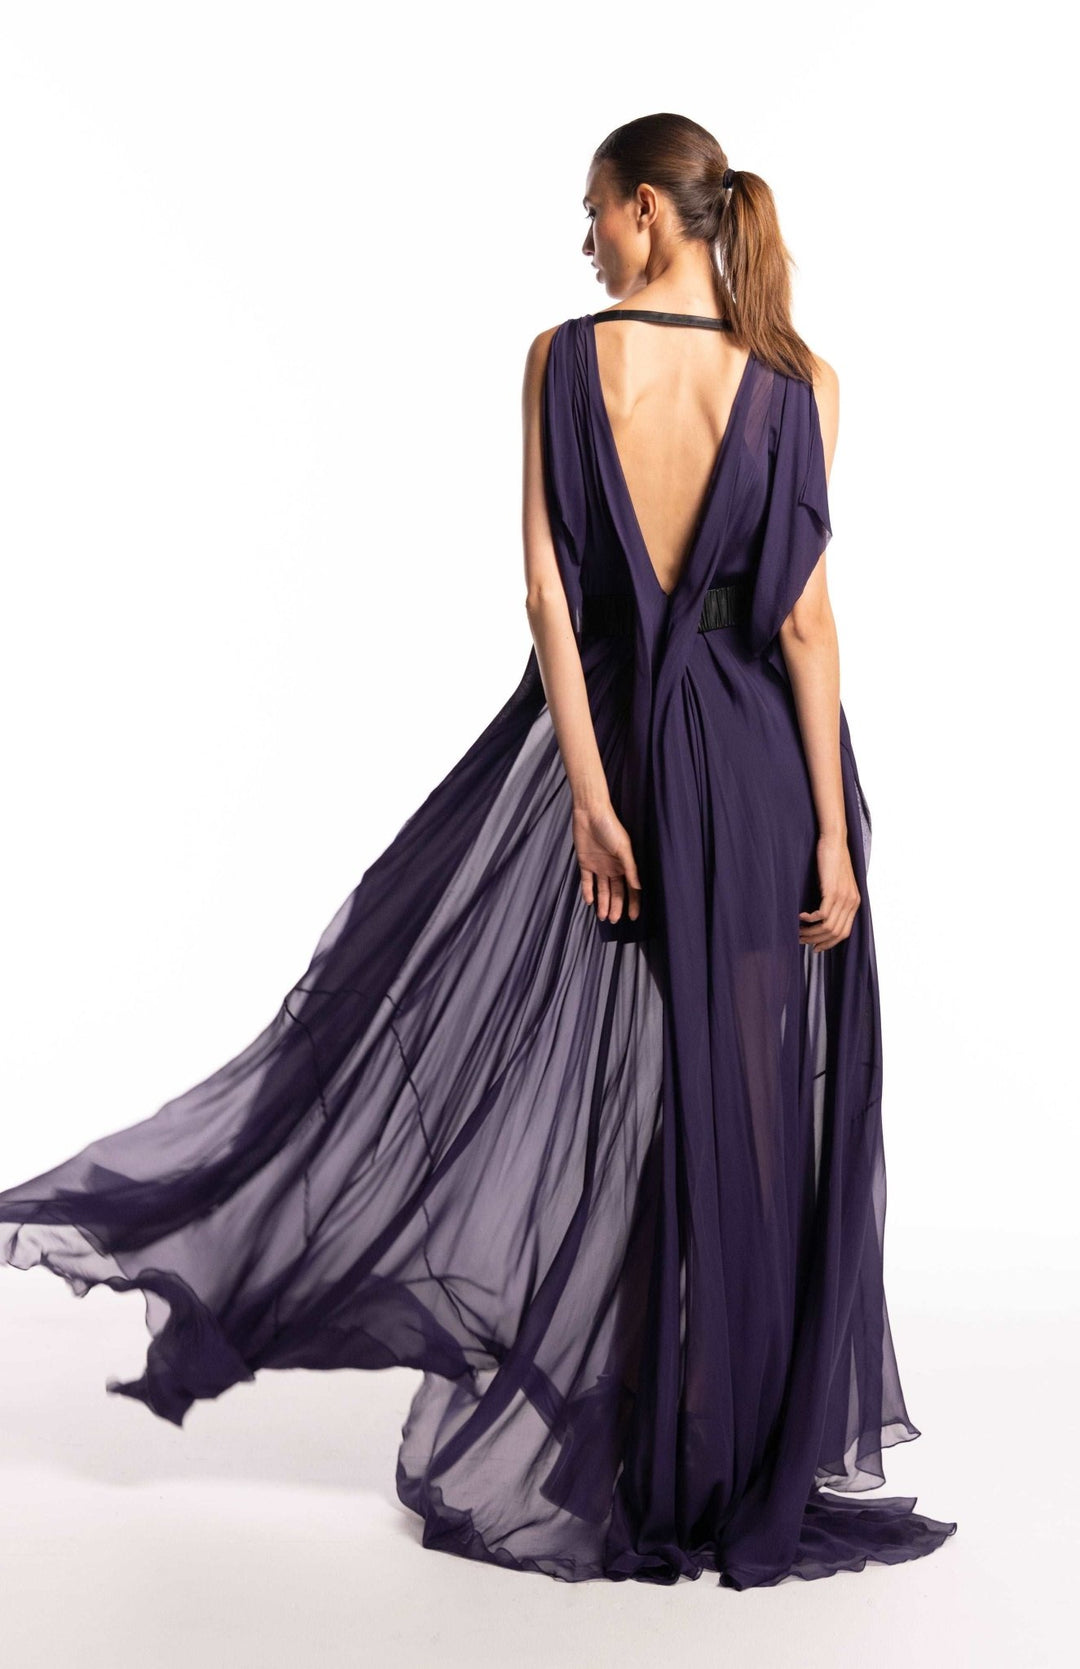 back, dramatic evening gown